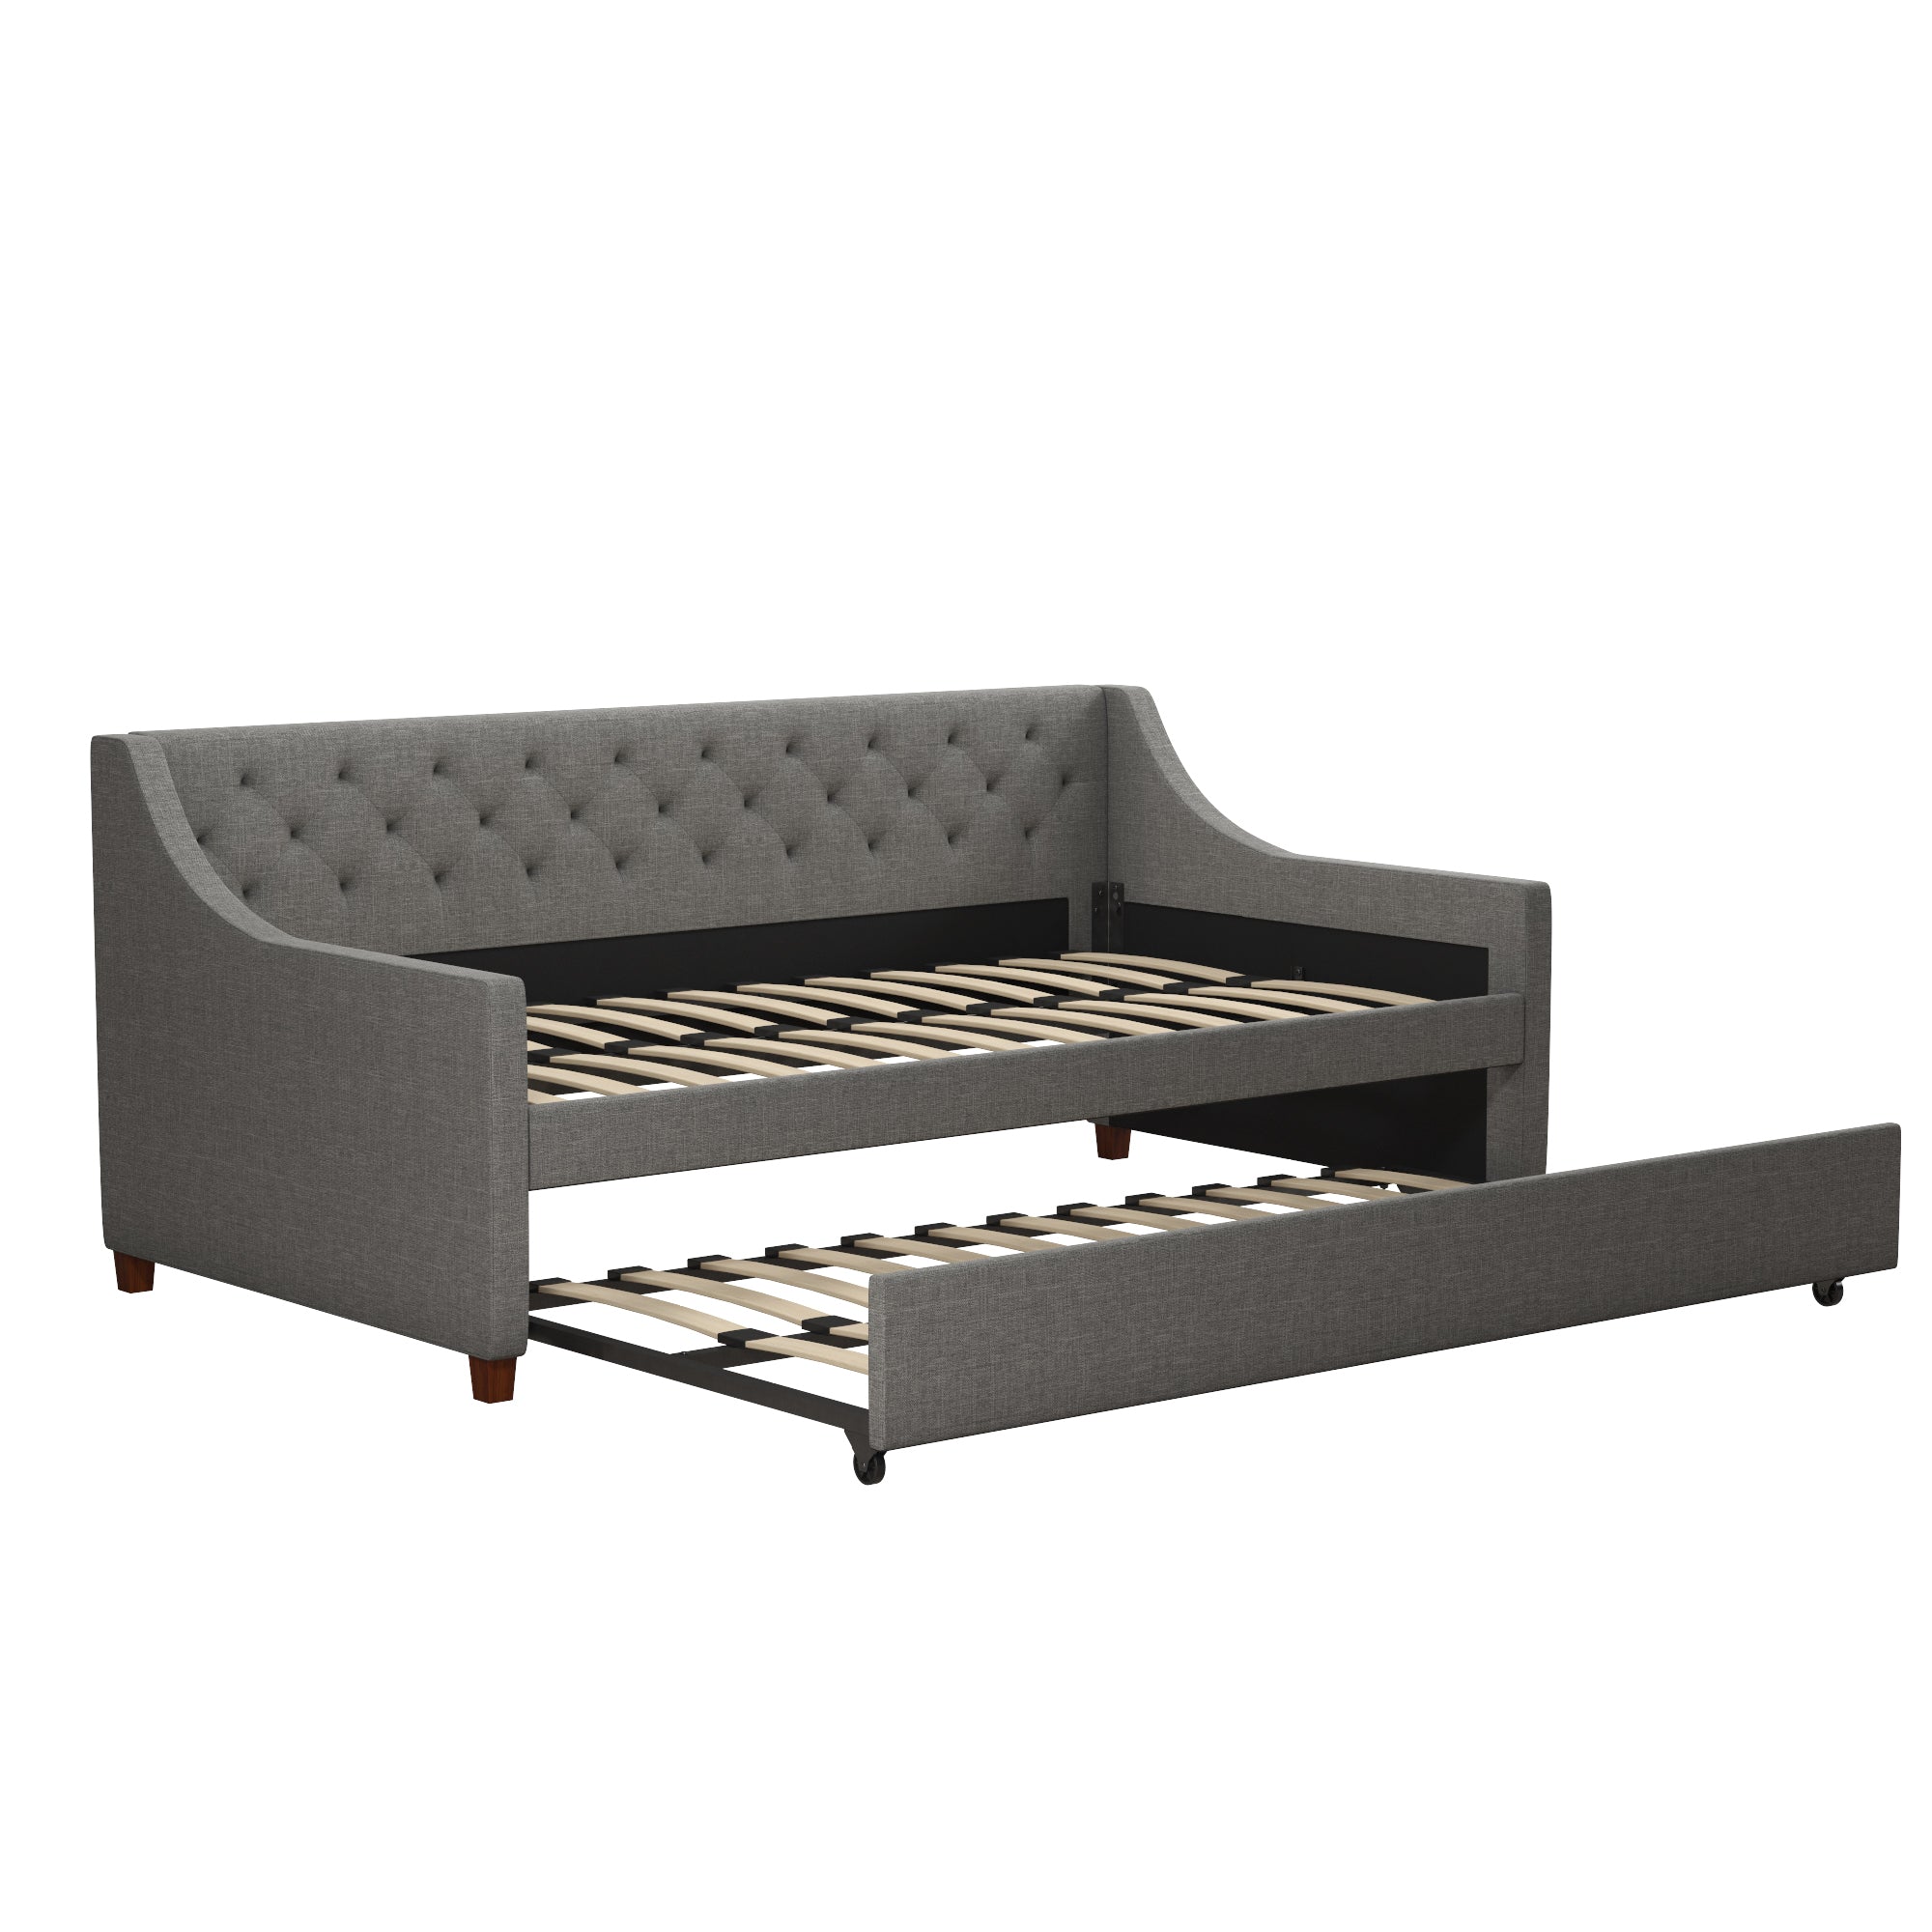 Her Majesty Daybed with Trundle – The Novogratz